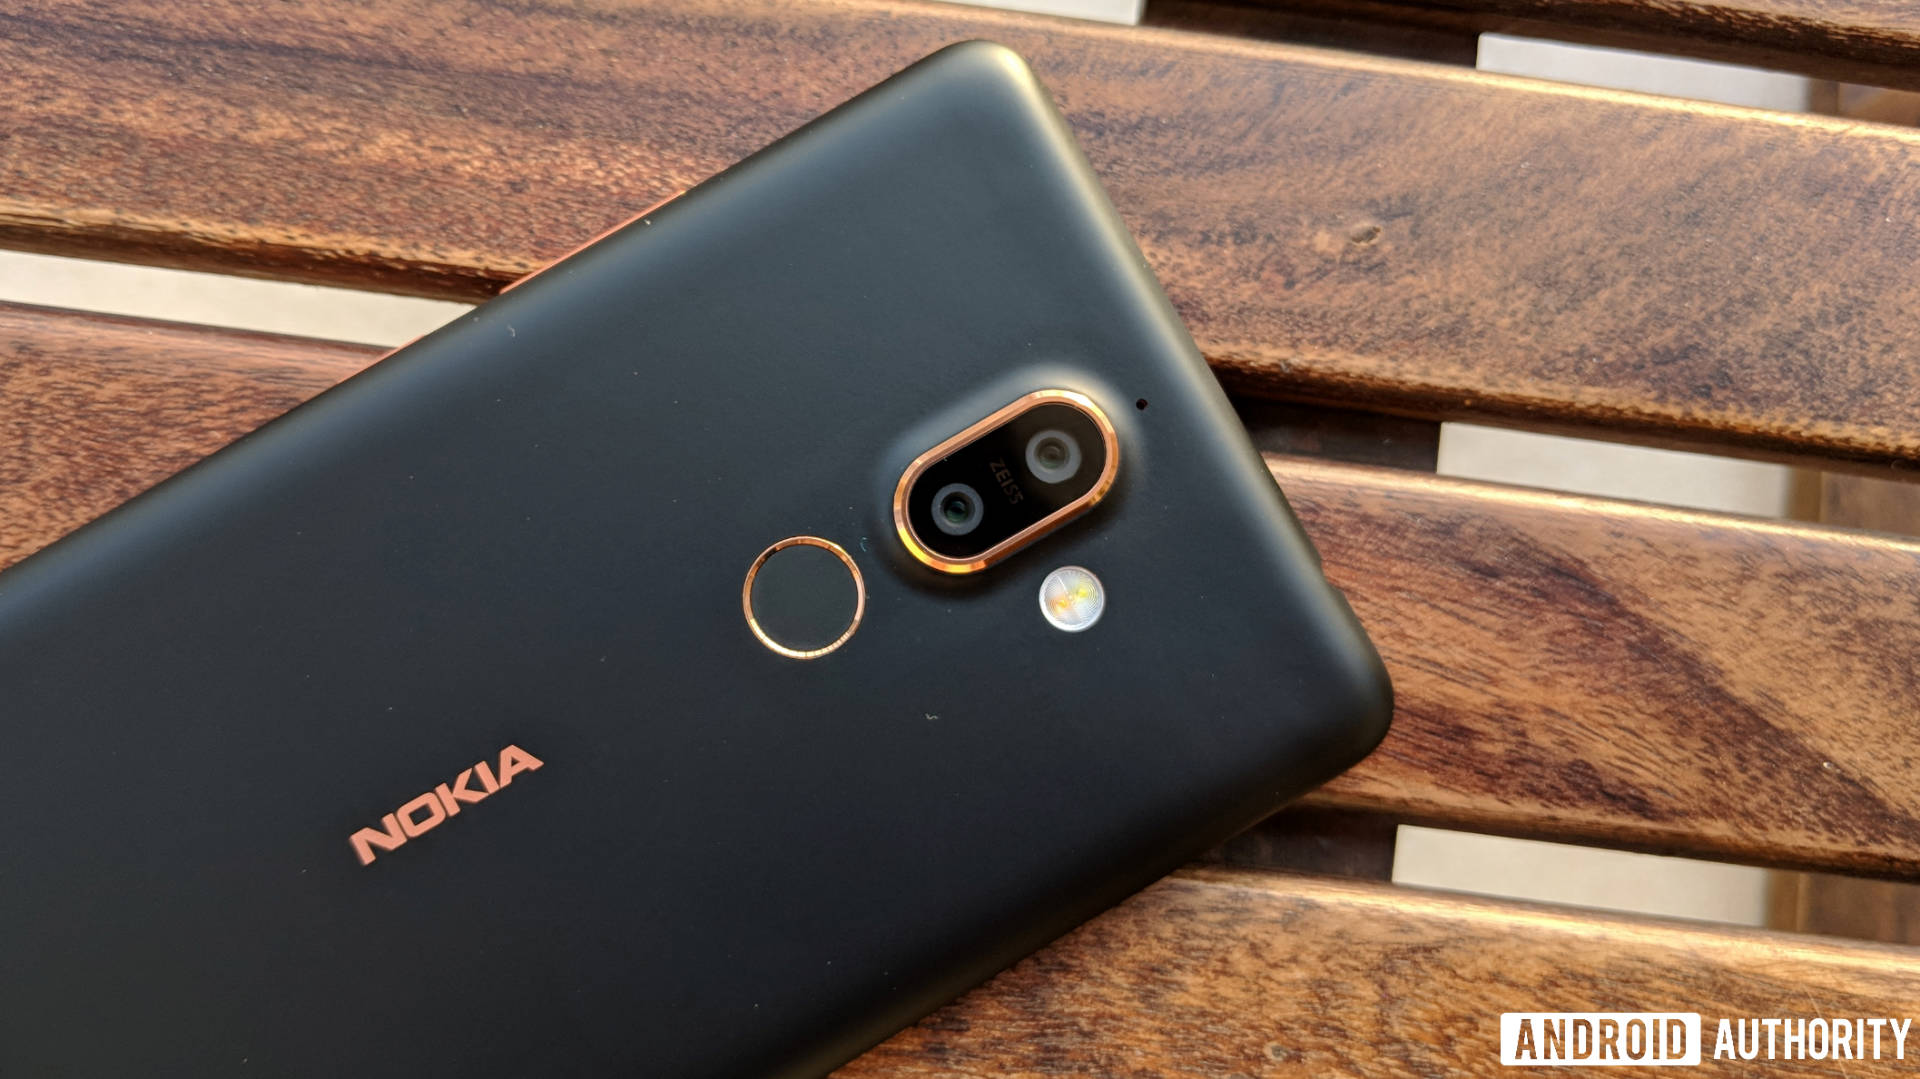 Nokia 7 plus from the back showing camera, Nokia logo and finger scanner